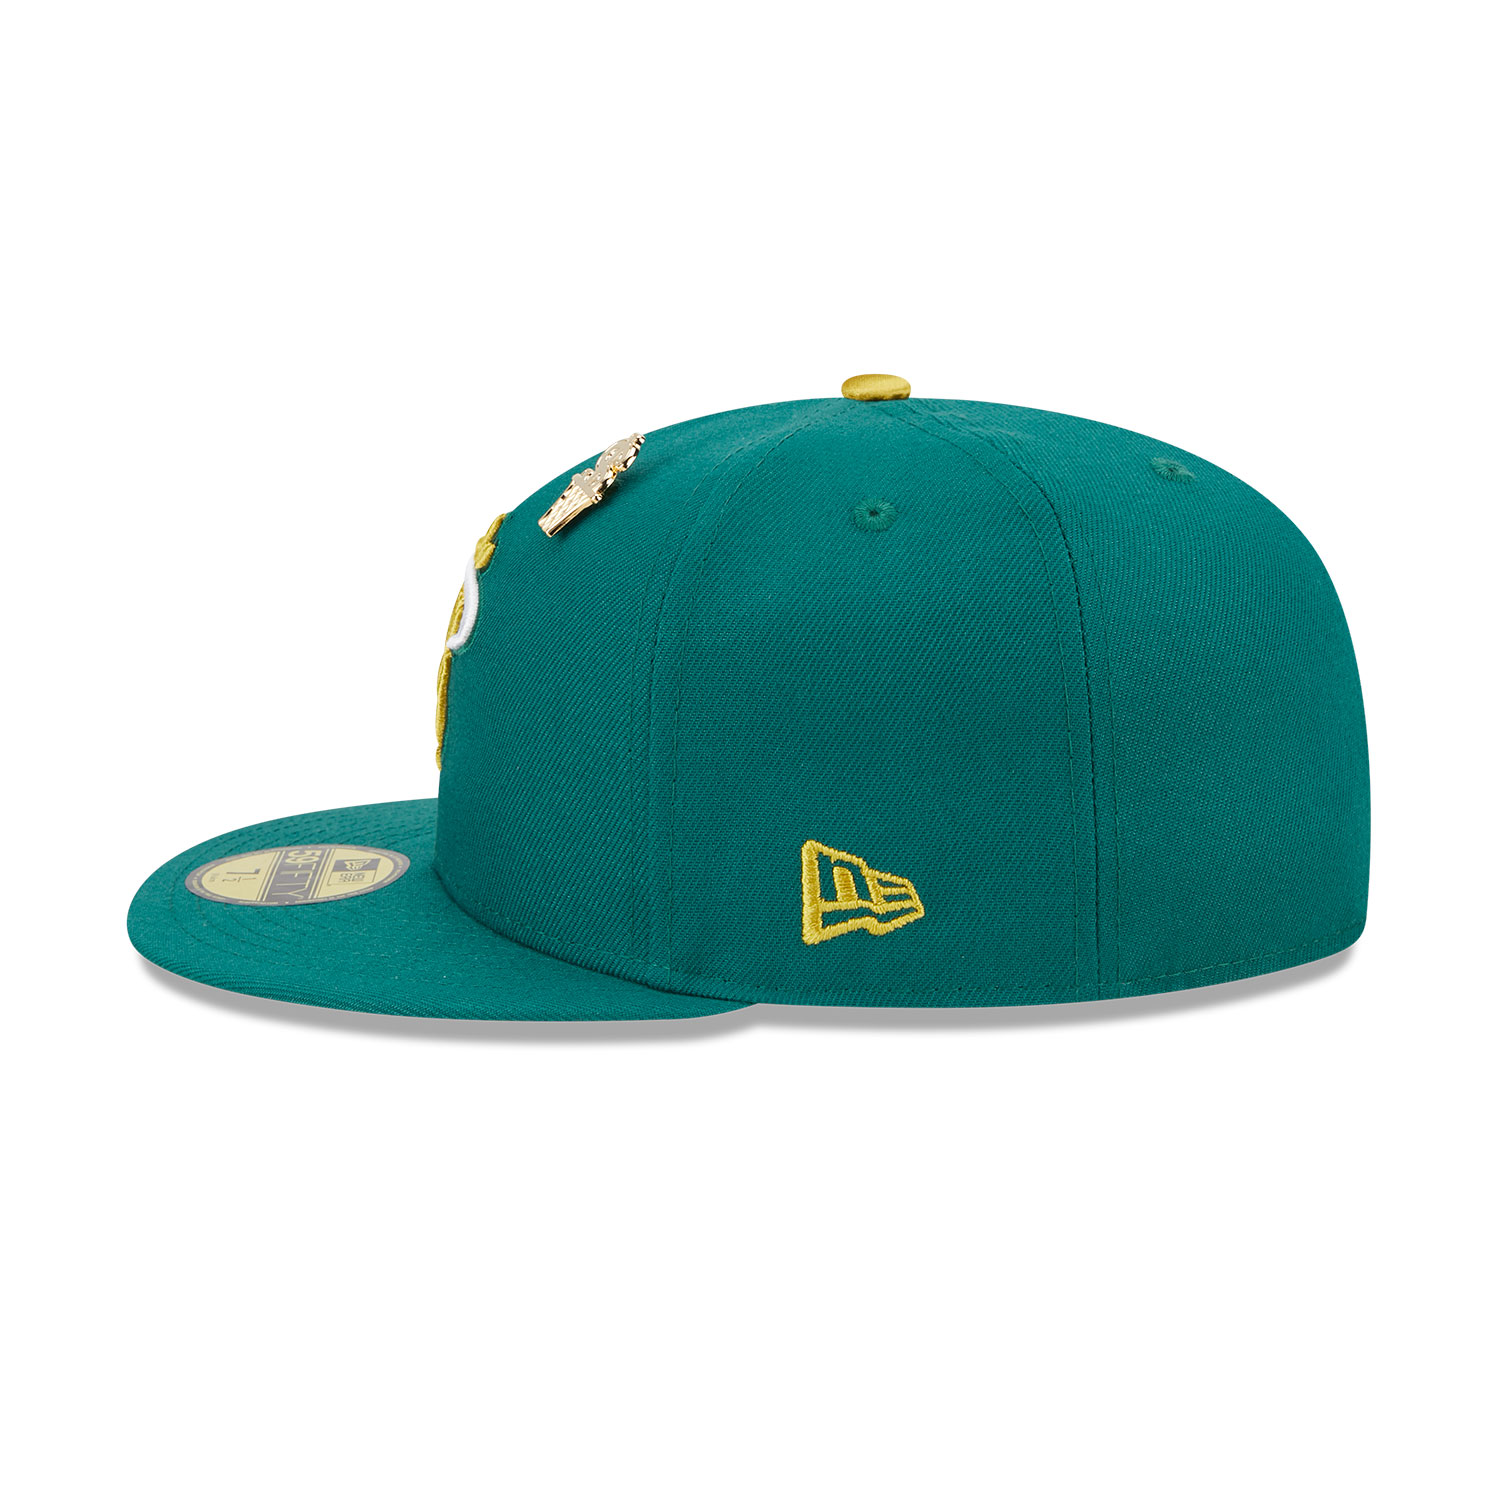 Miami Heat Max Bet Green 59FIFTY Fitted Cap